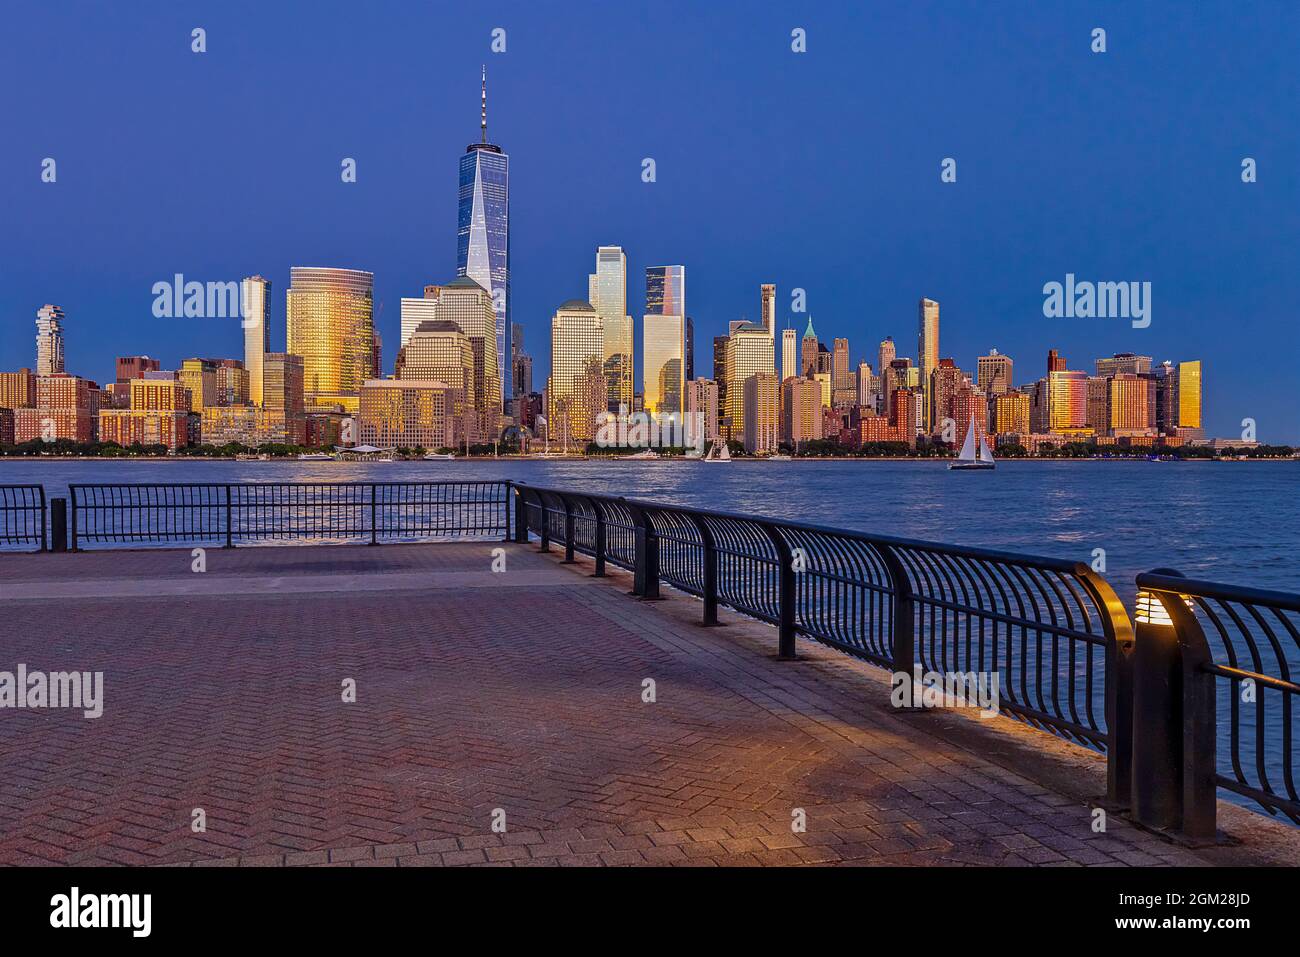 NYC WTC Skyline - The NYC skyline with One World Trade Center, coined the Freedom Tower in lower Manhattan. The New York City skyline is illuminated b Stock Photo